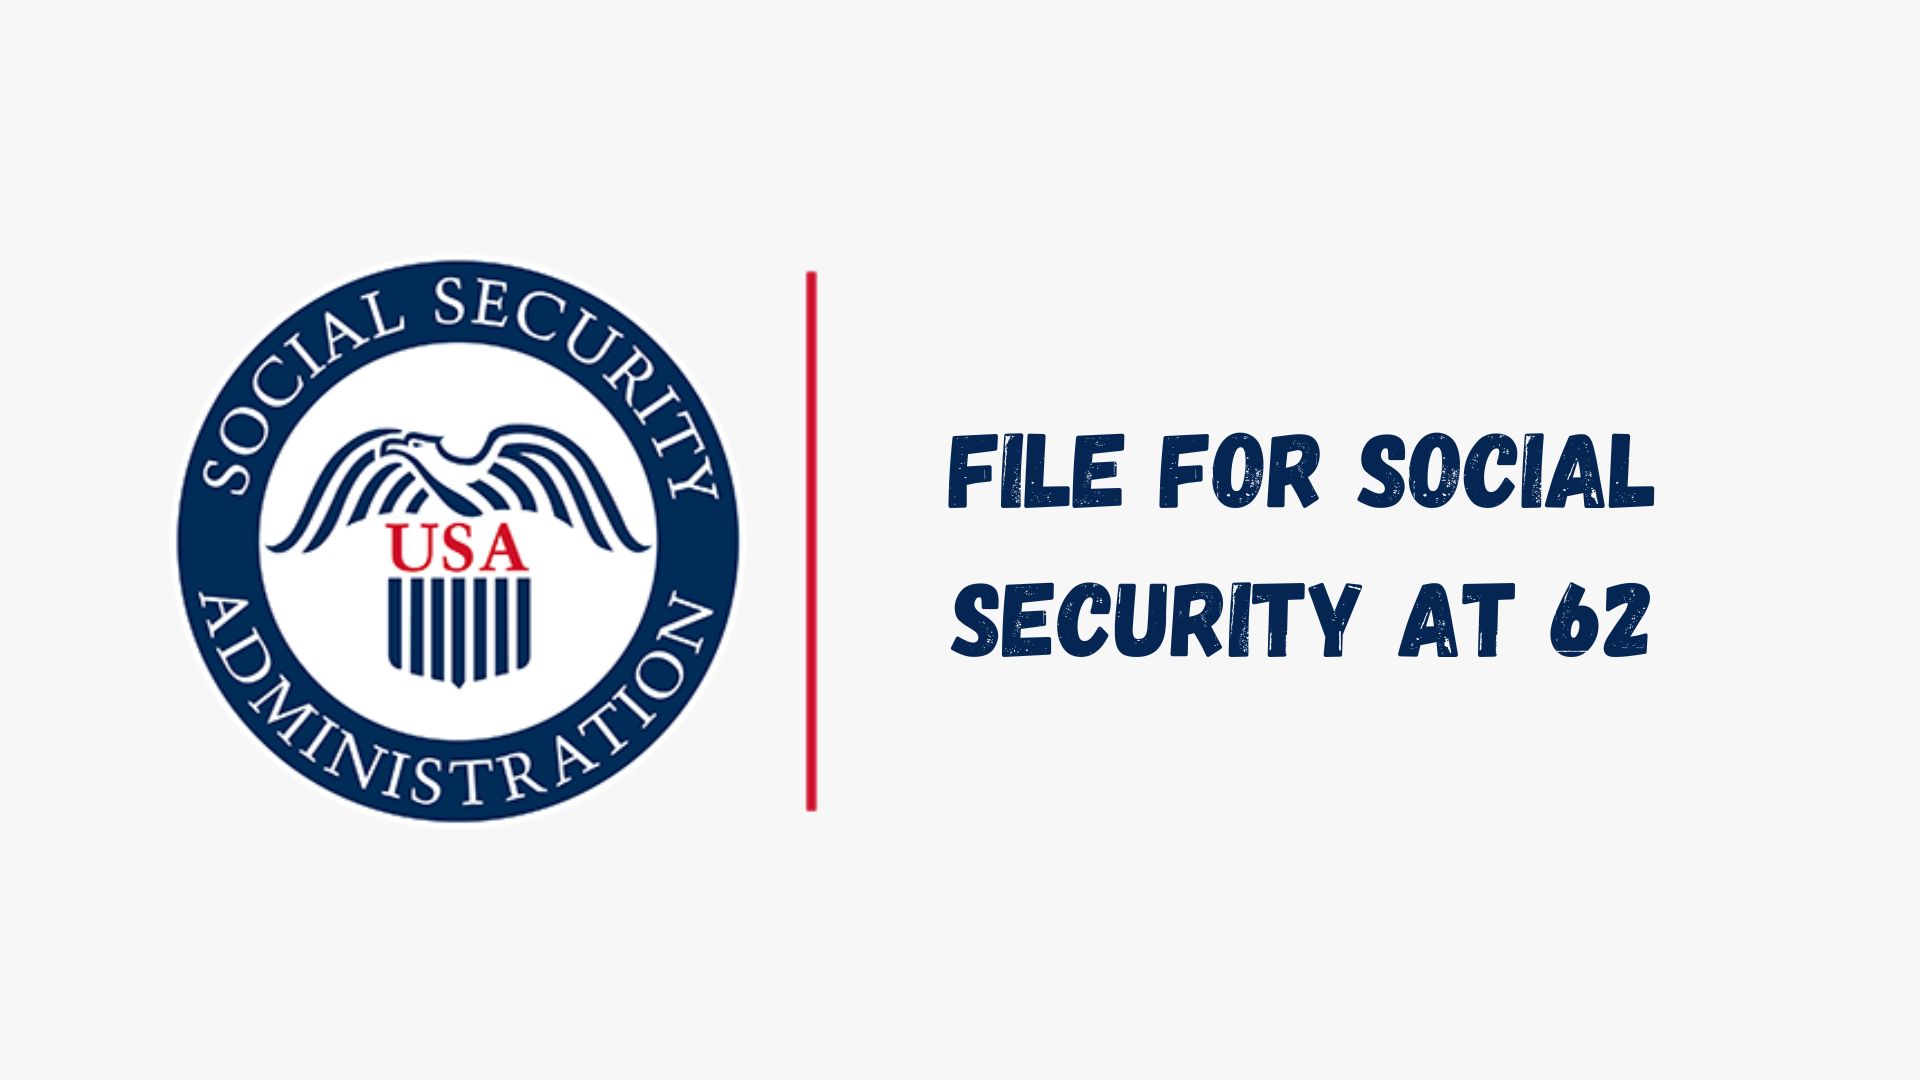 File for Social Security at 62.